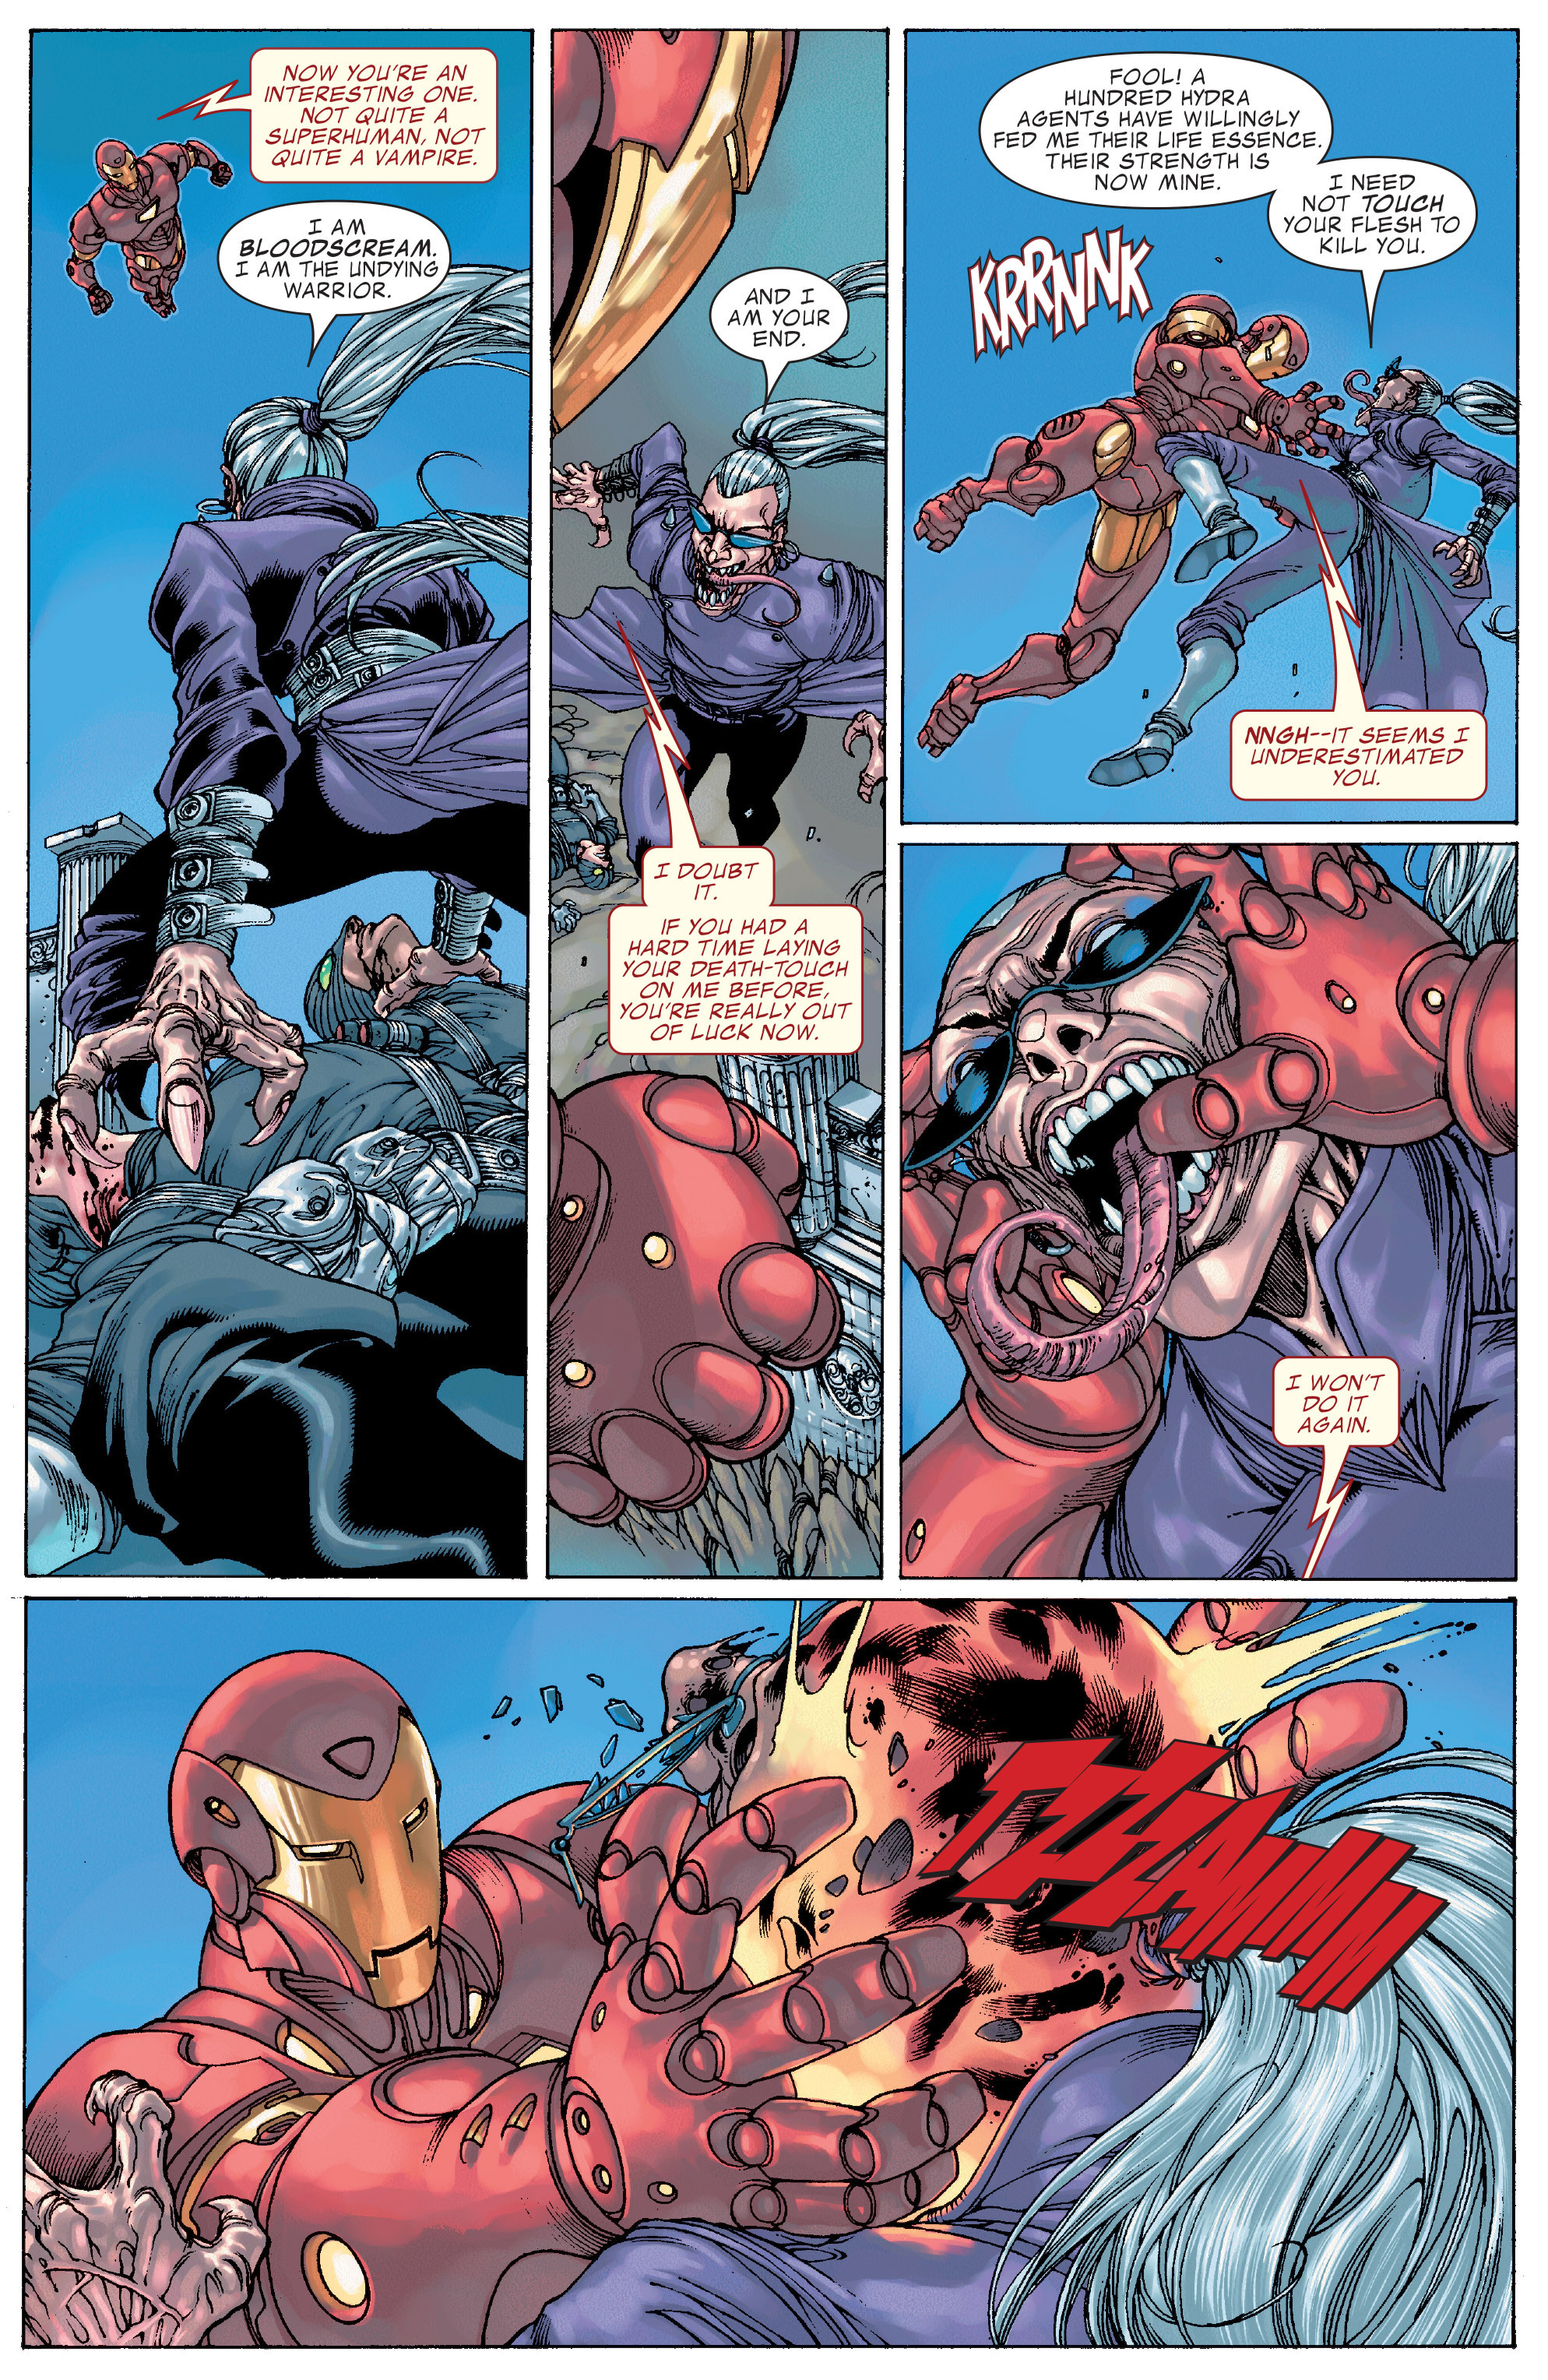 Iron Man: Director of S.H.I.E.L.D. Annual Full Page 35